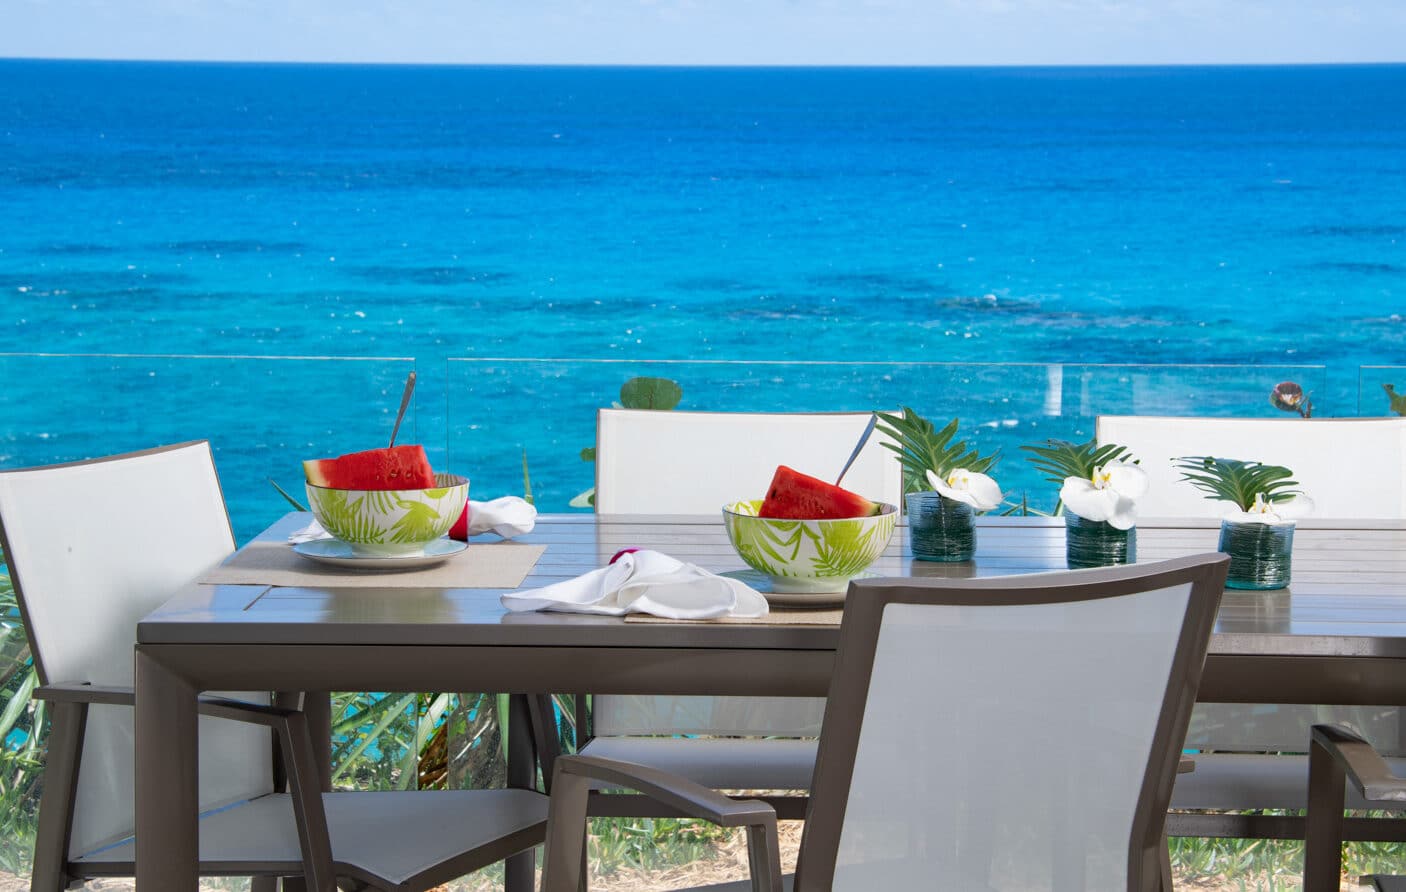 A dining table outside with a view of the ocean in the background.